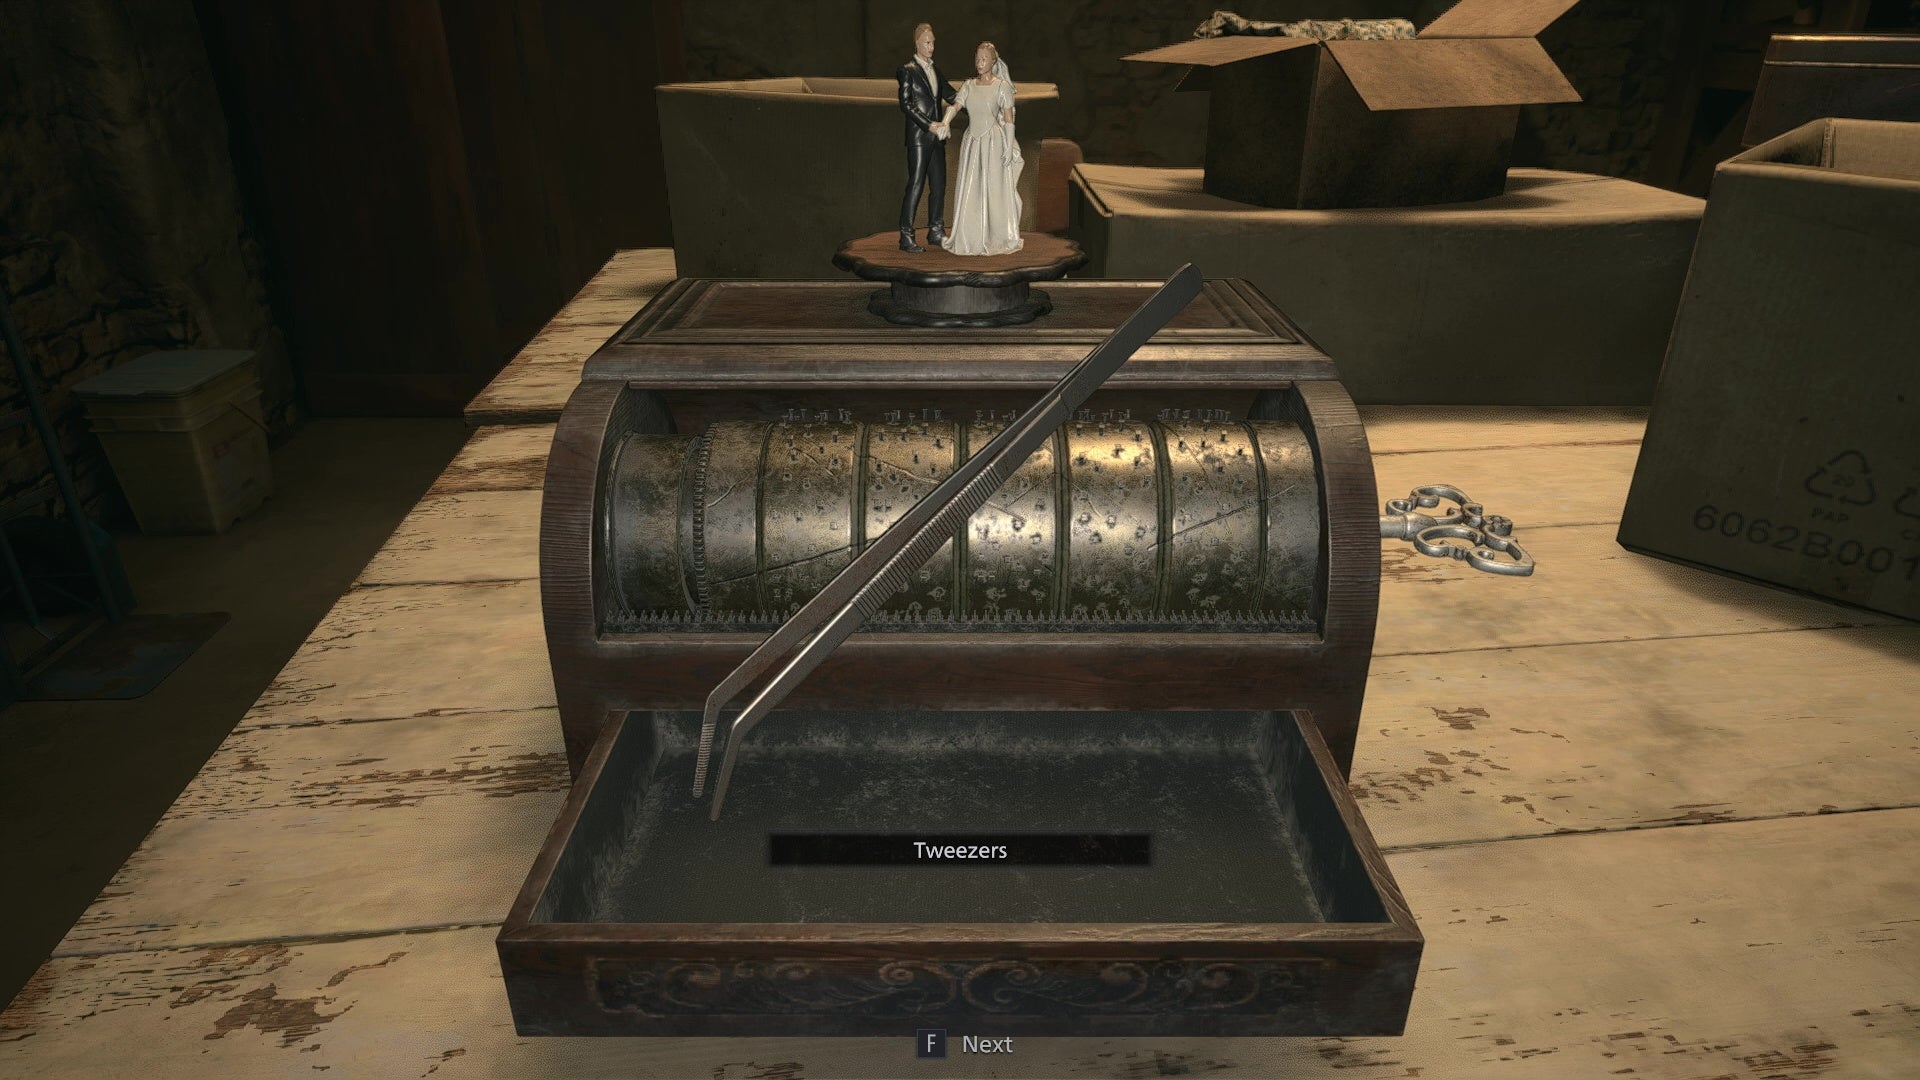 An image of the solved music box puzzle, with the reward being a pair of tweezers.